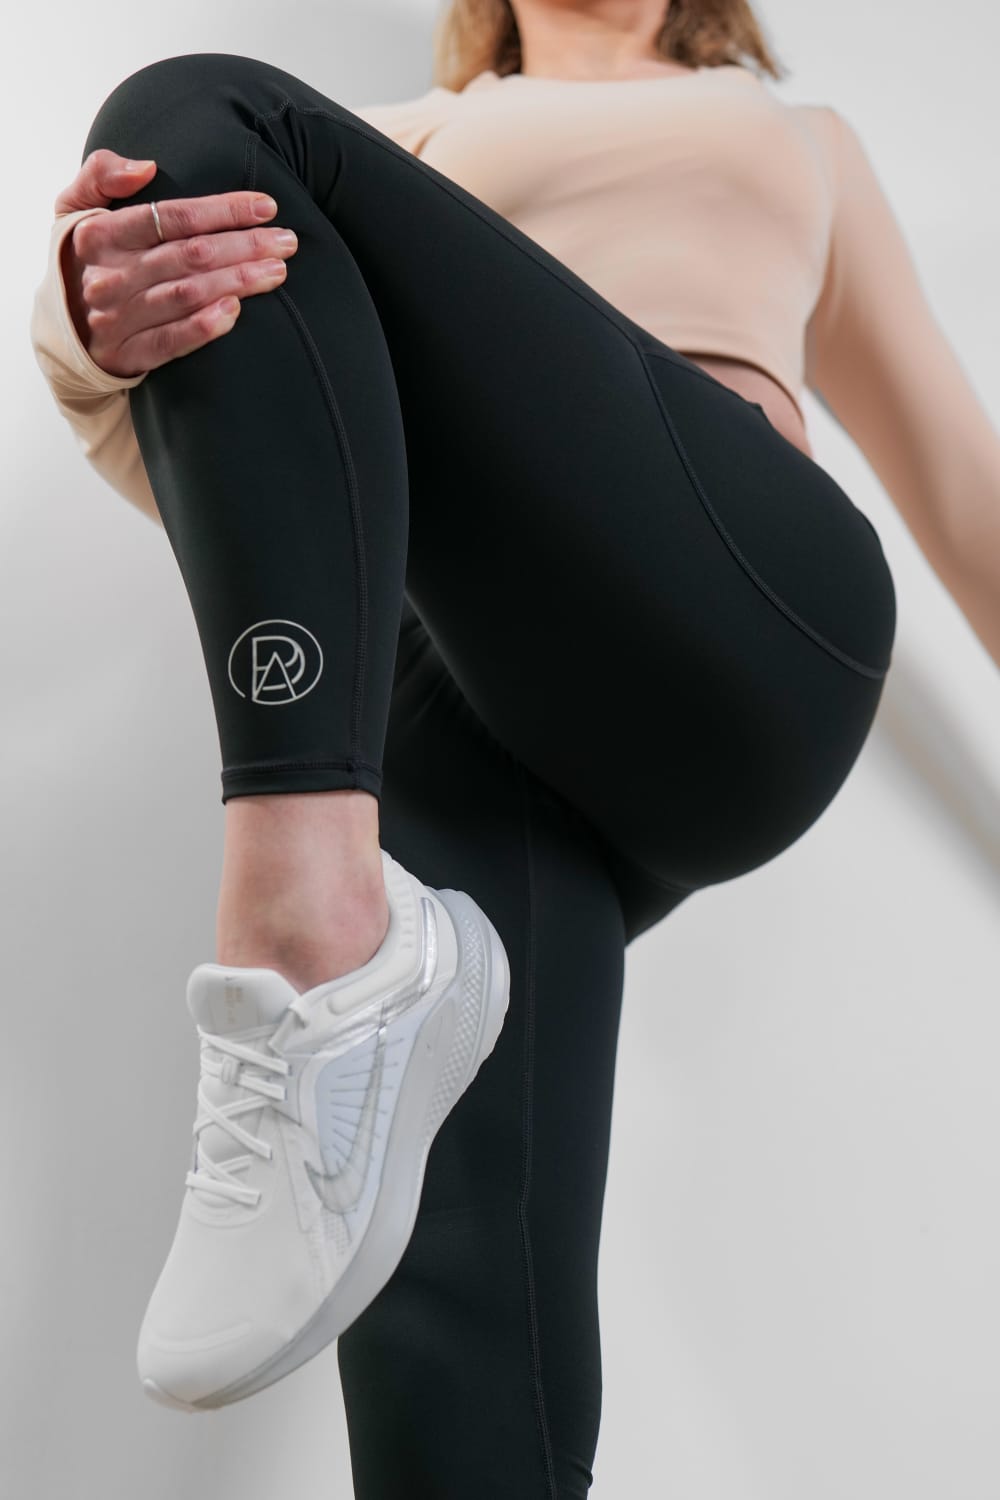 I Tried Yoga Leggings Made With Knee Pads. Here's What I Thought